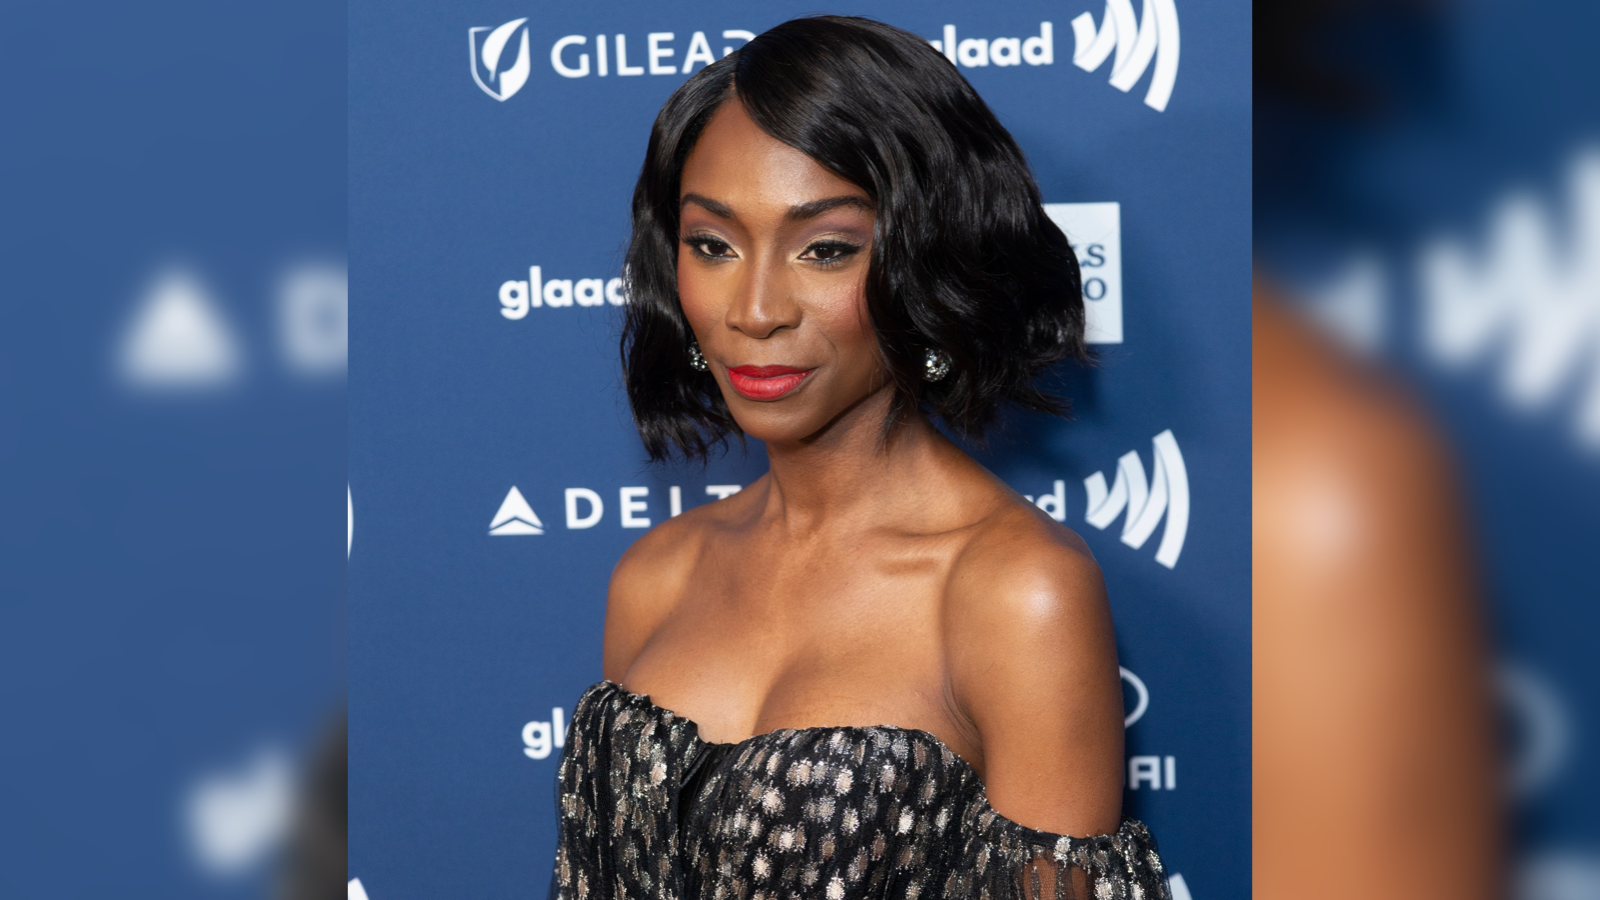 New York, NY - May 4, 2019: Angelica Ross wearing dress by Michael Costello attends the 30th Annual GLAAD Media Awards at New York Hilton Midtown